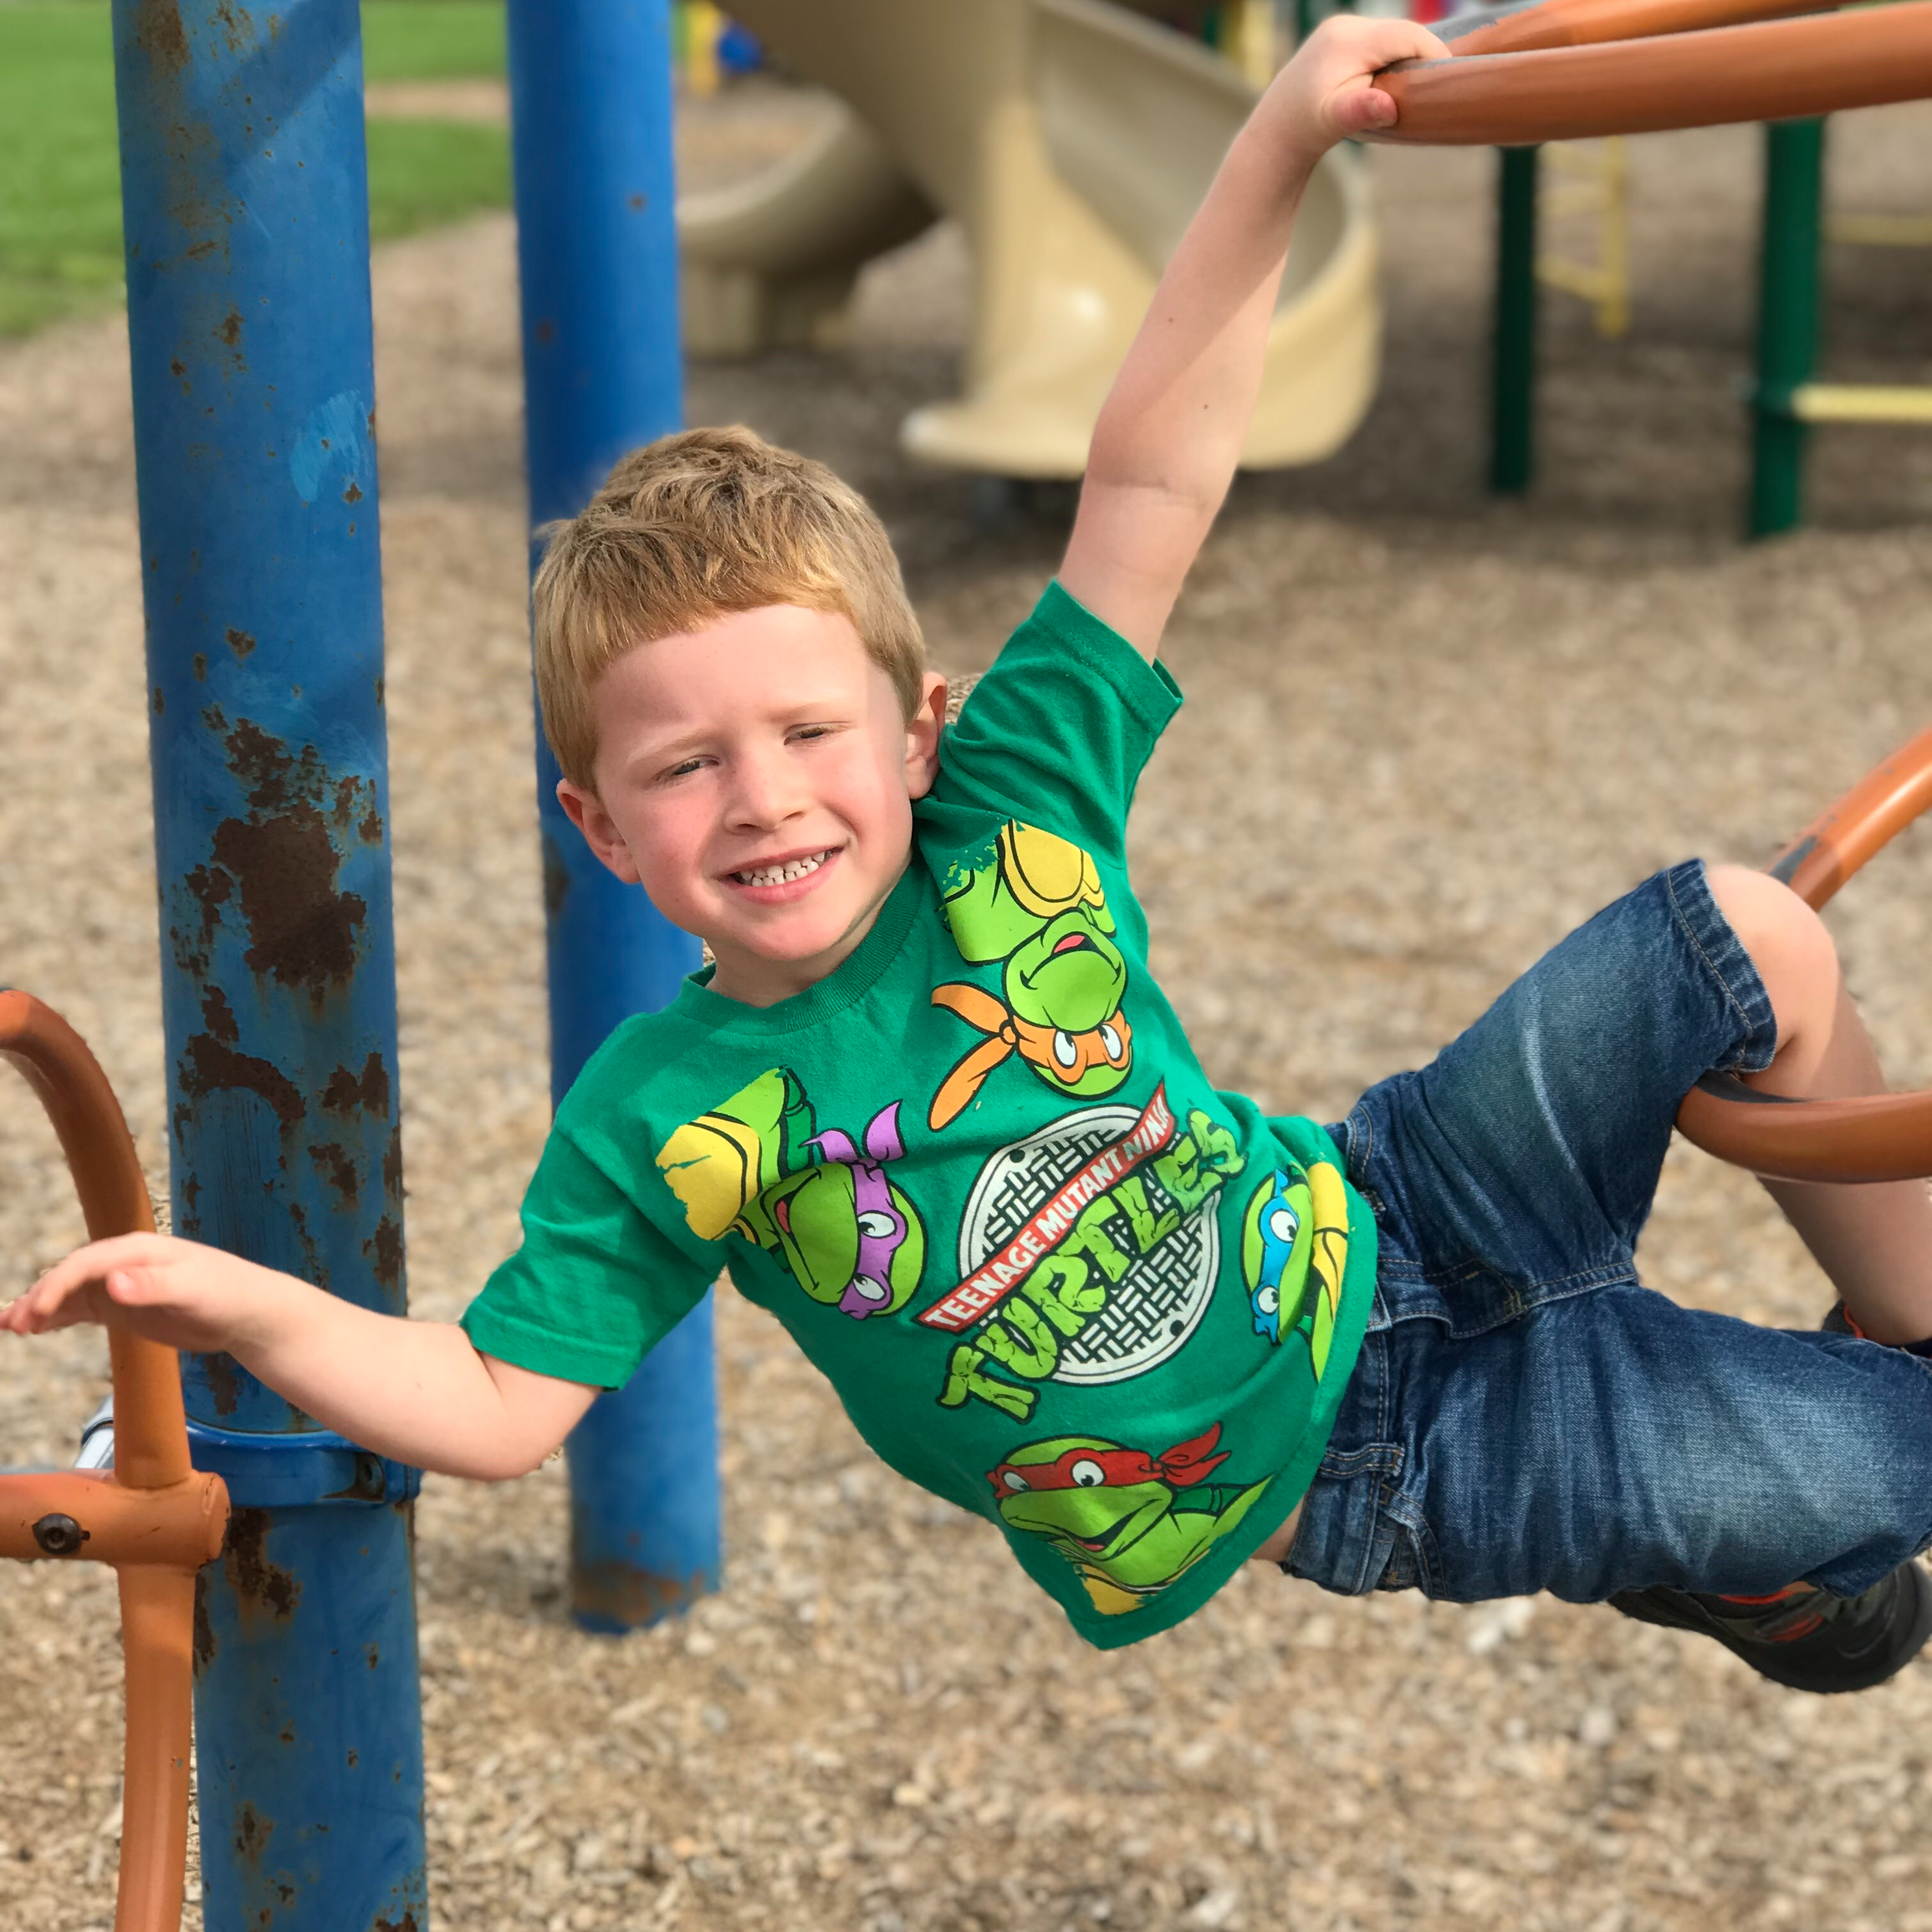 child hanging from playground equipment and smiling